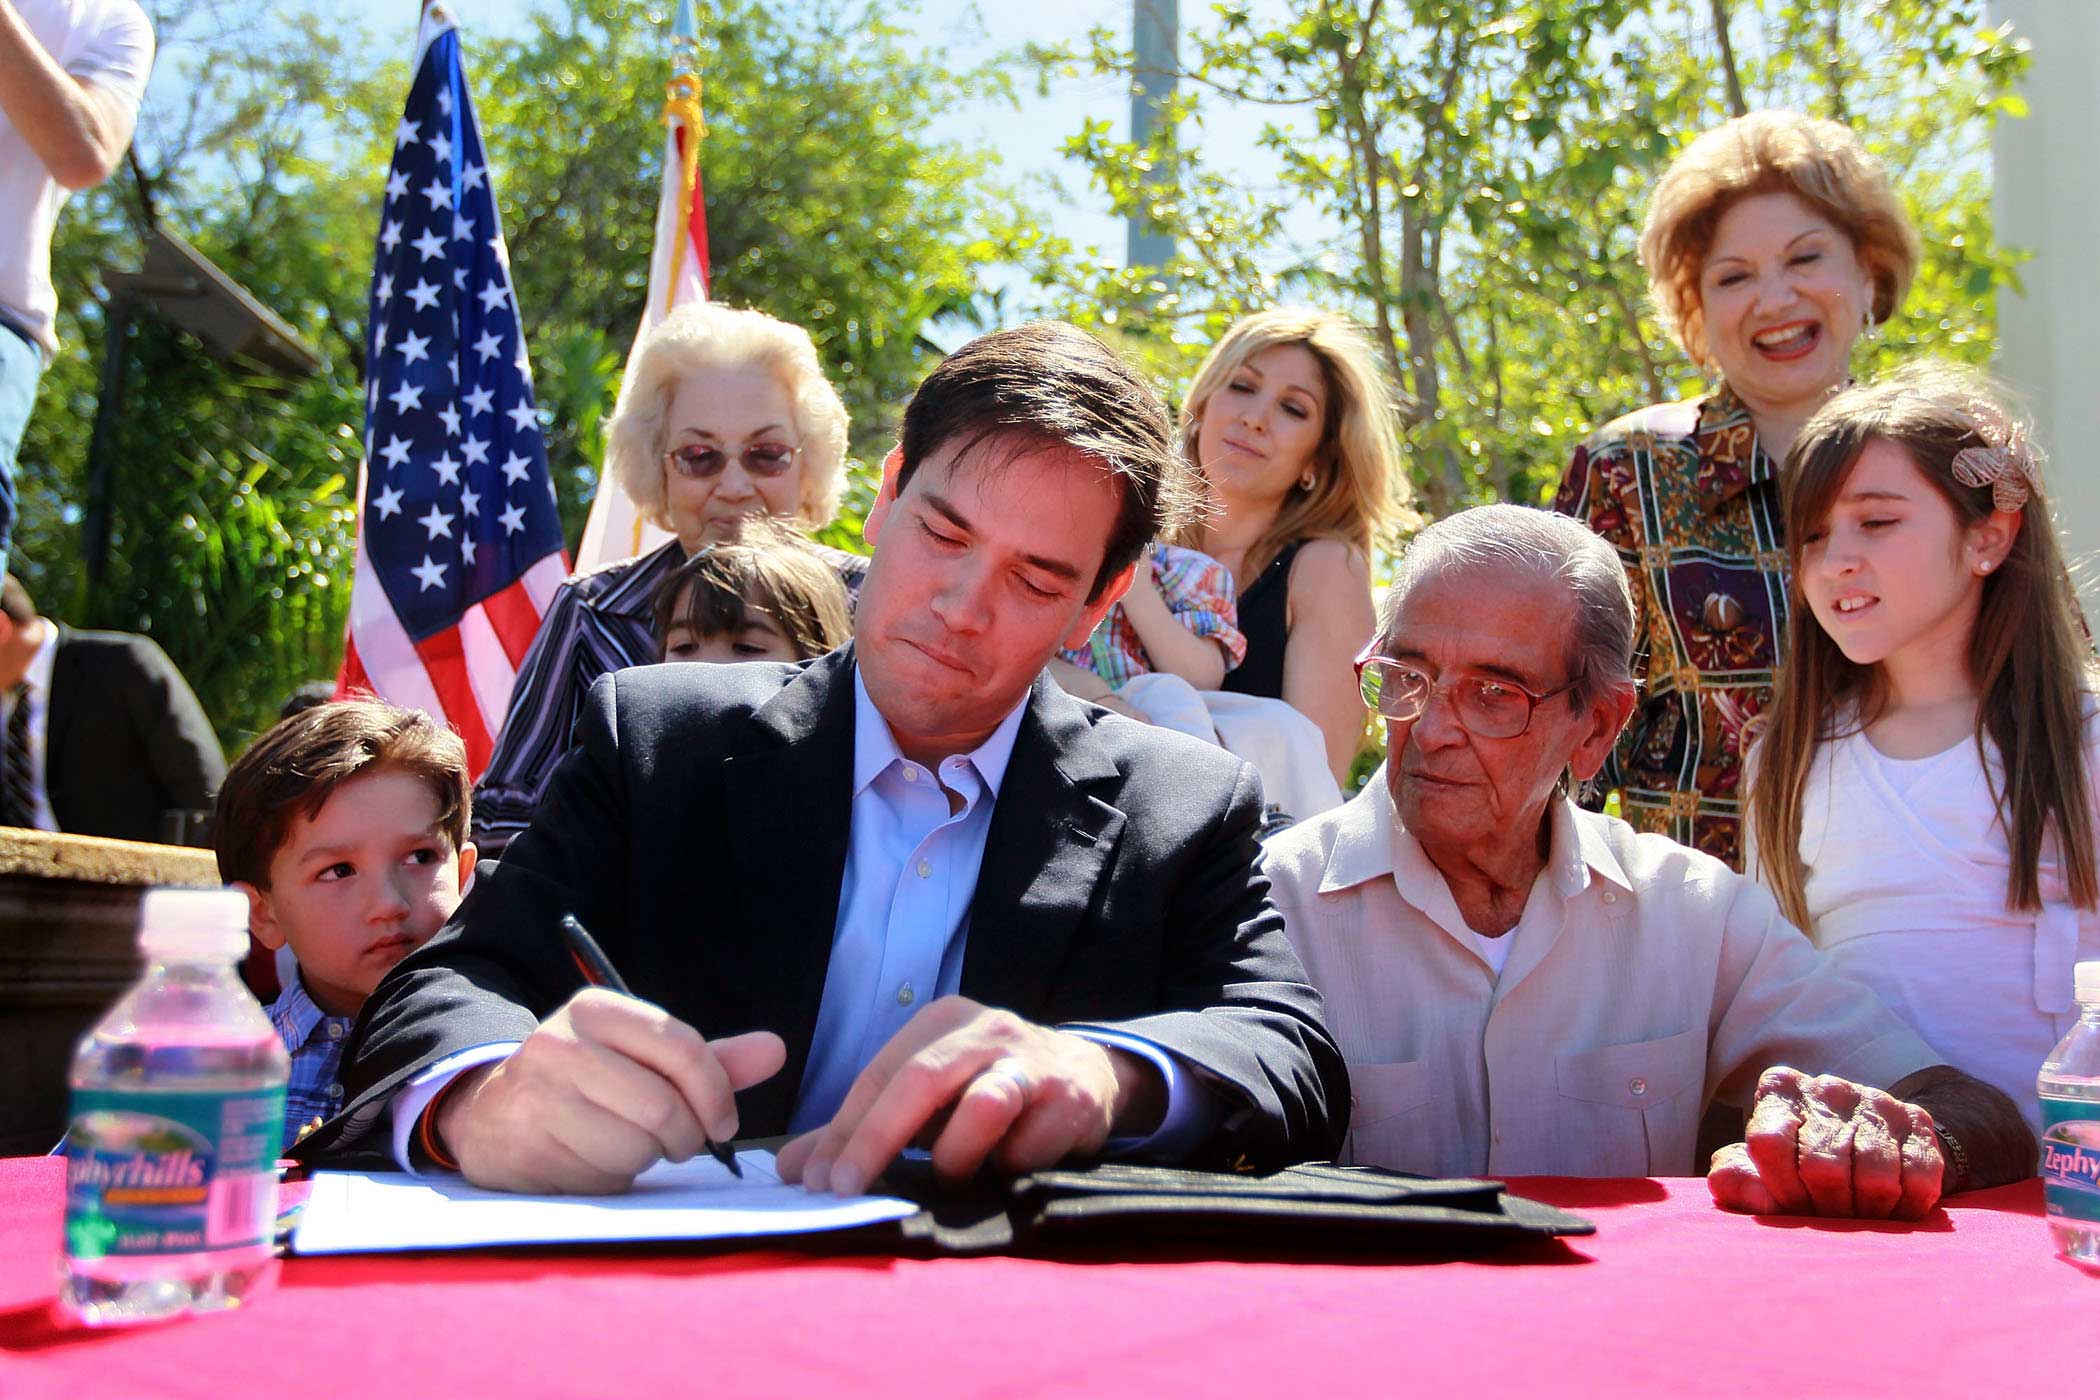 Marco Rubio with his son, Anthony Rubio, father, Mario Rubio and daughter Amanda Rubio as he signs election documents officially qualifying him as a Republican candidate for the U.S. Senate on April 27, 2010 in Miami, Fla.